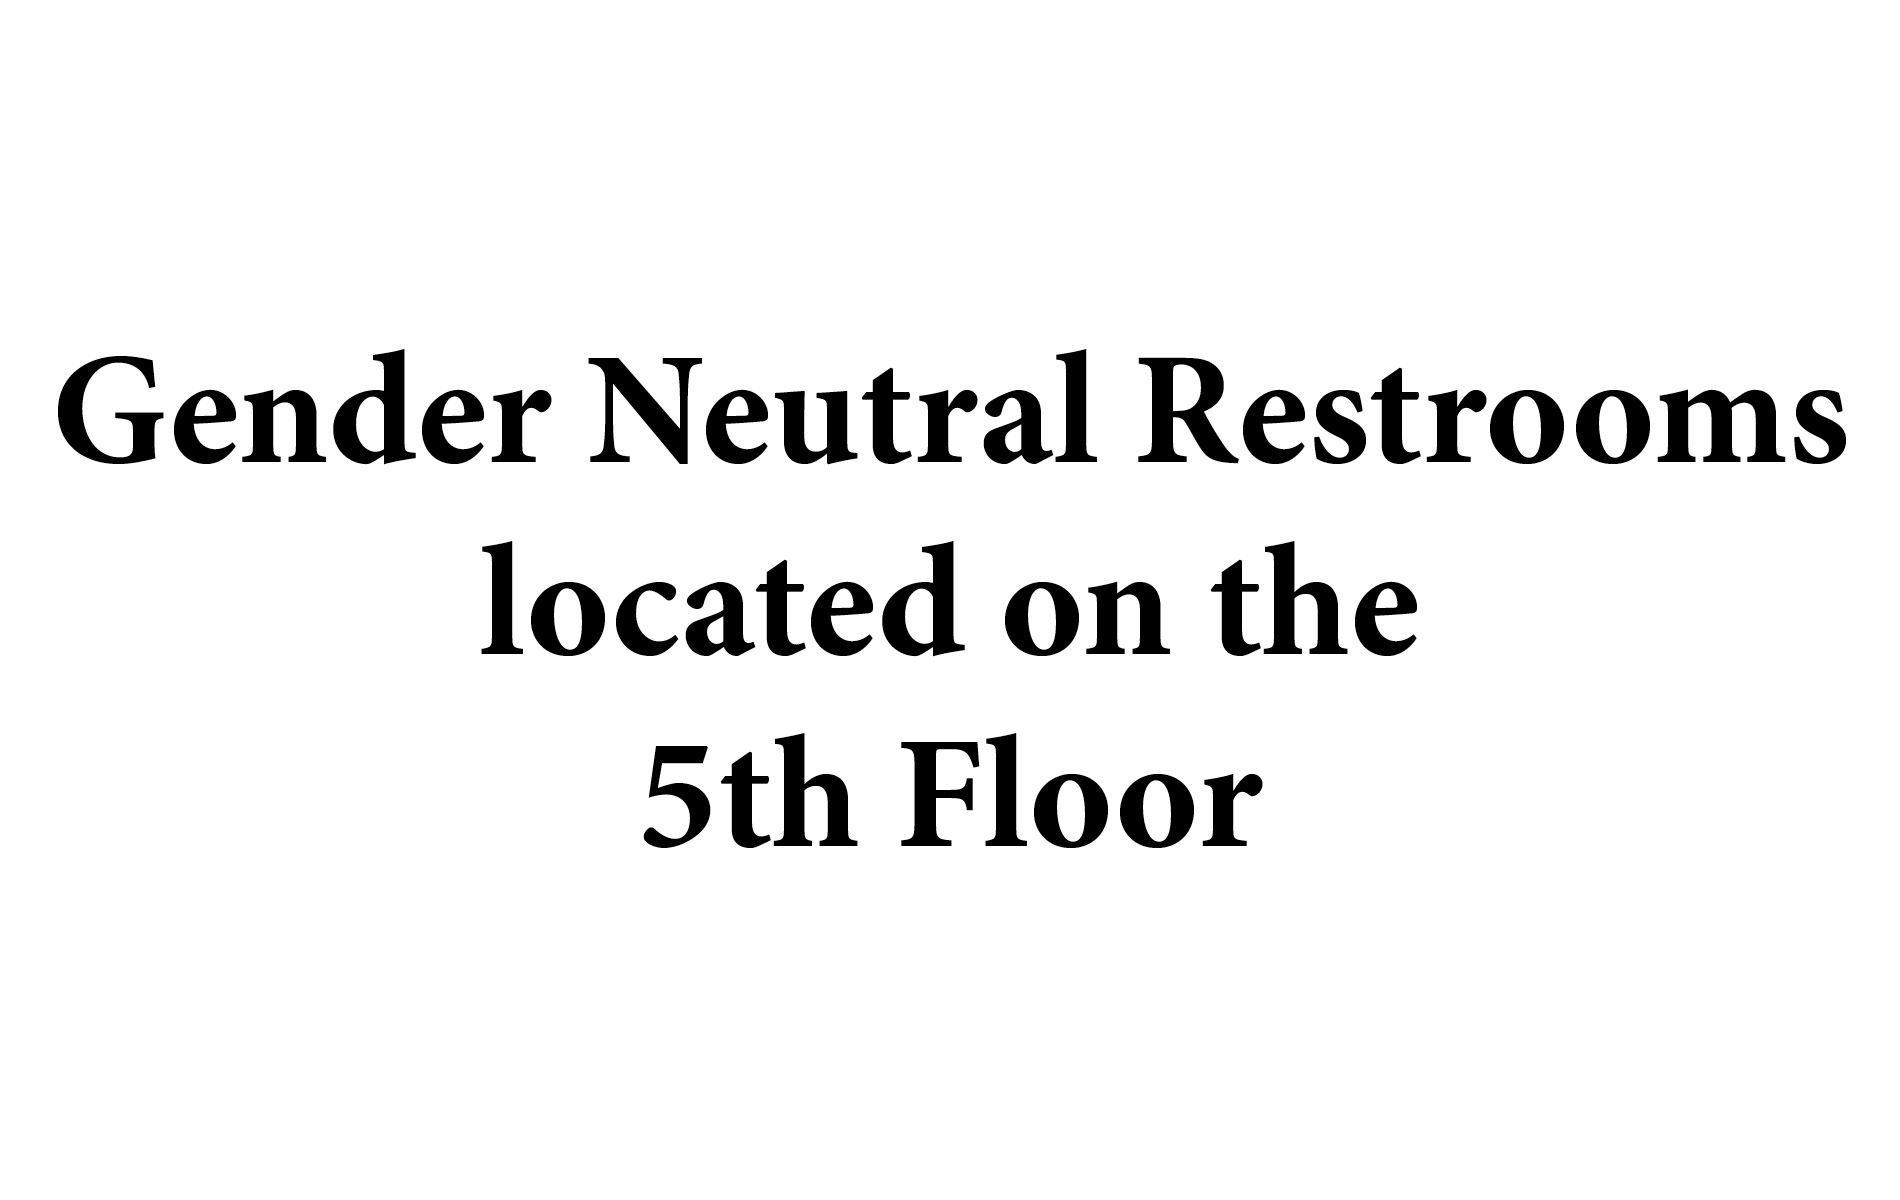 black letters on white background - Gender Neutral Restrooms located on the  5th Floor